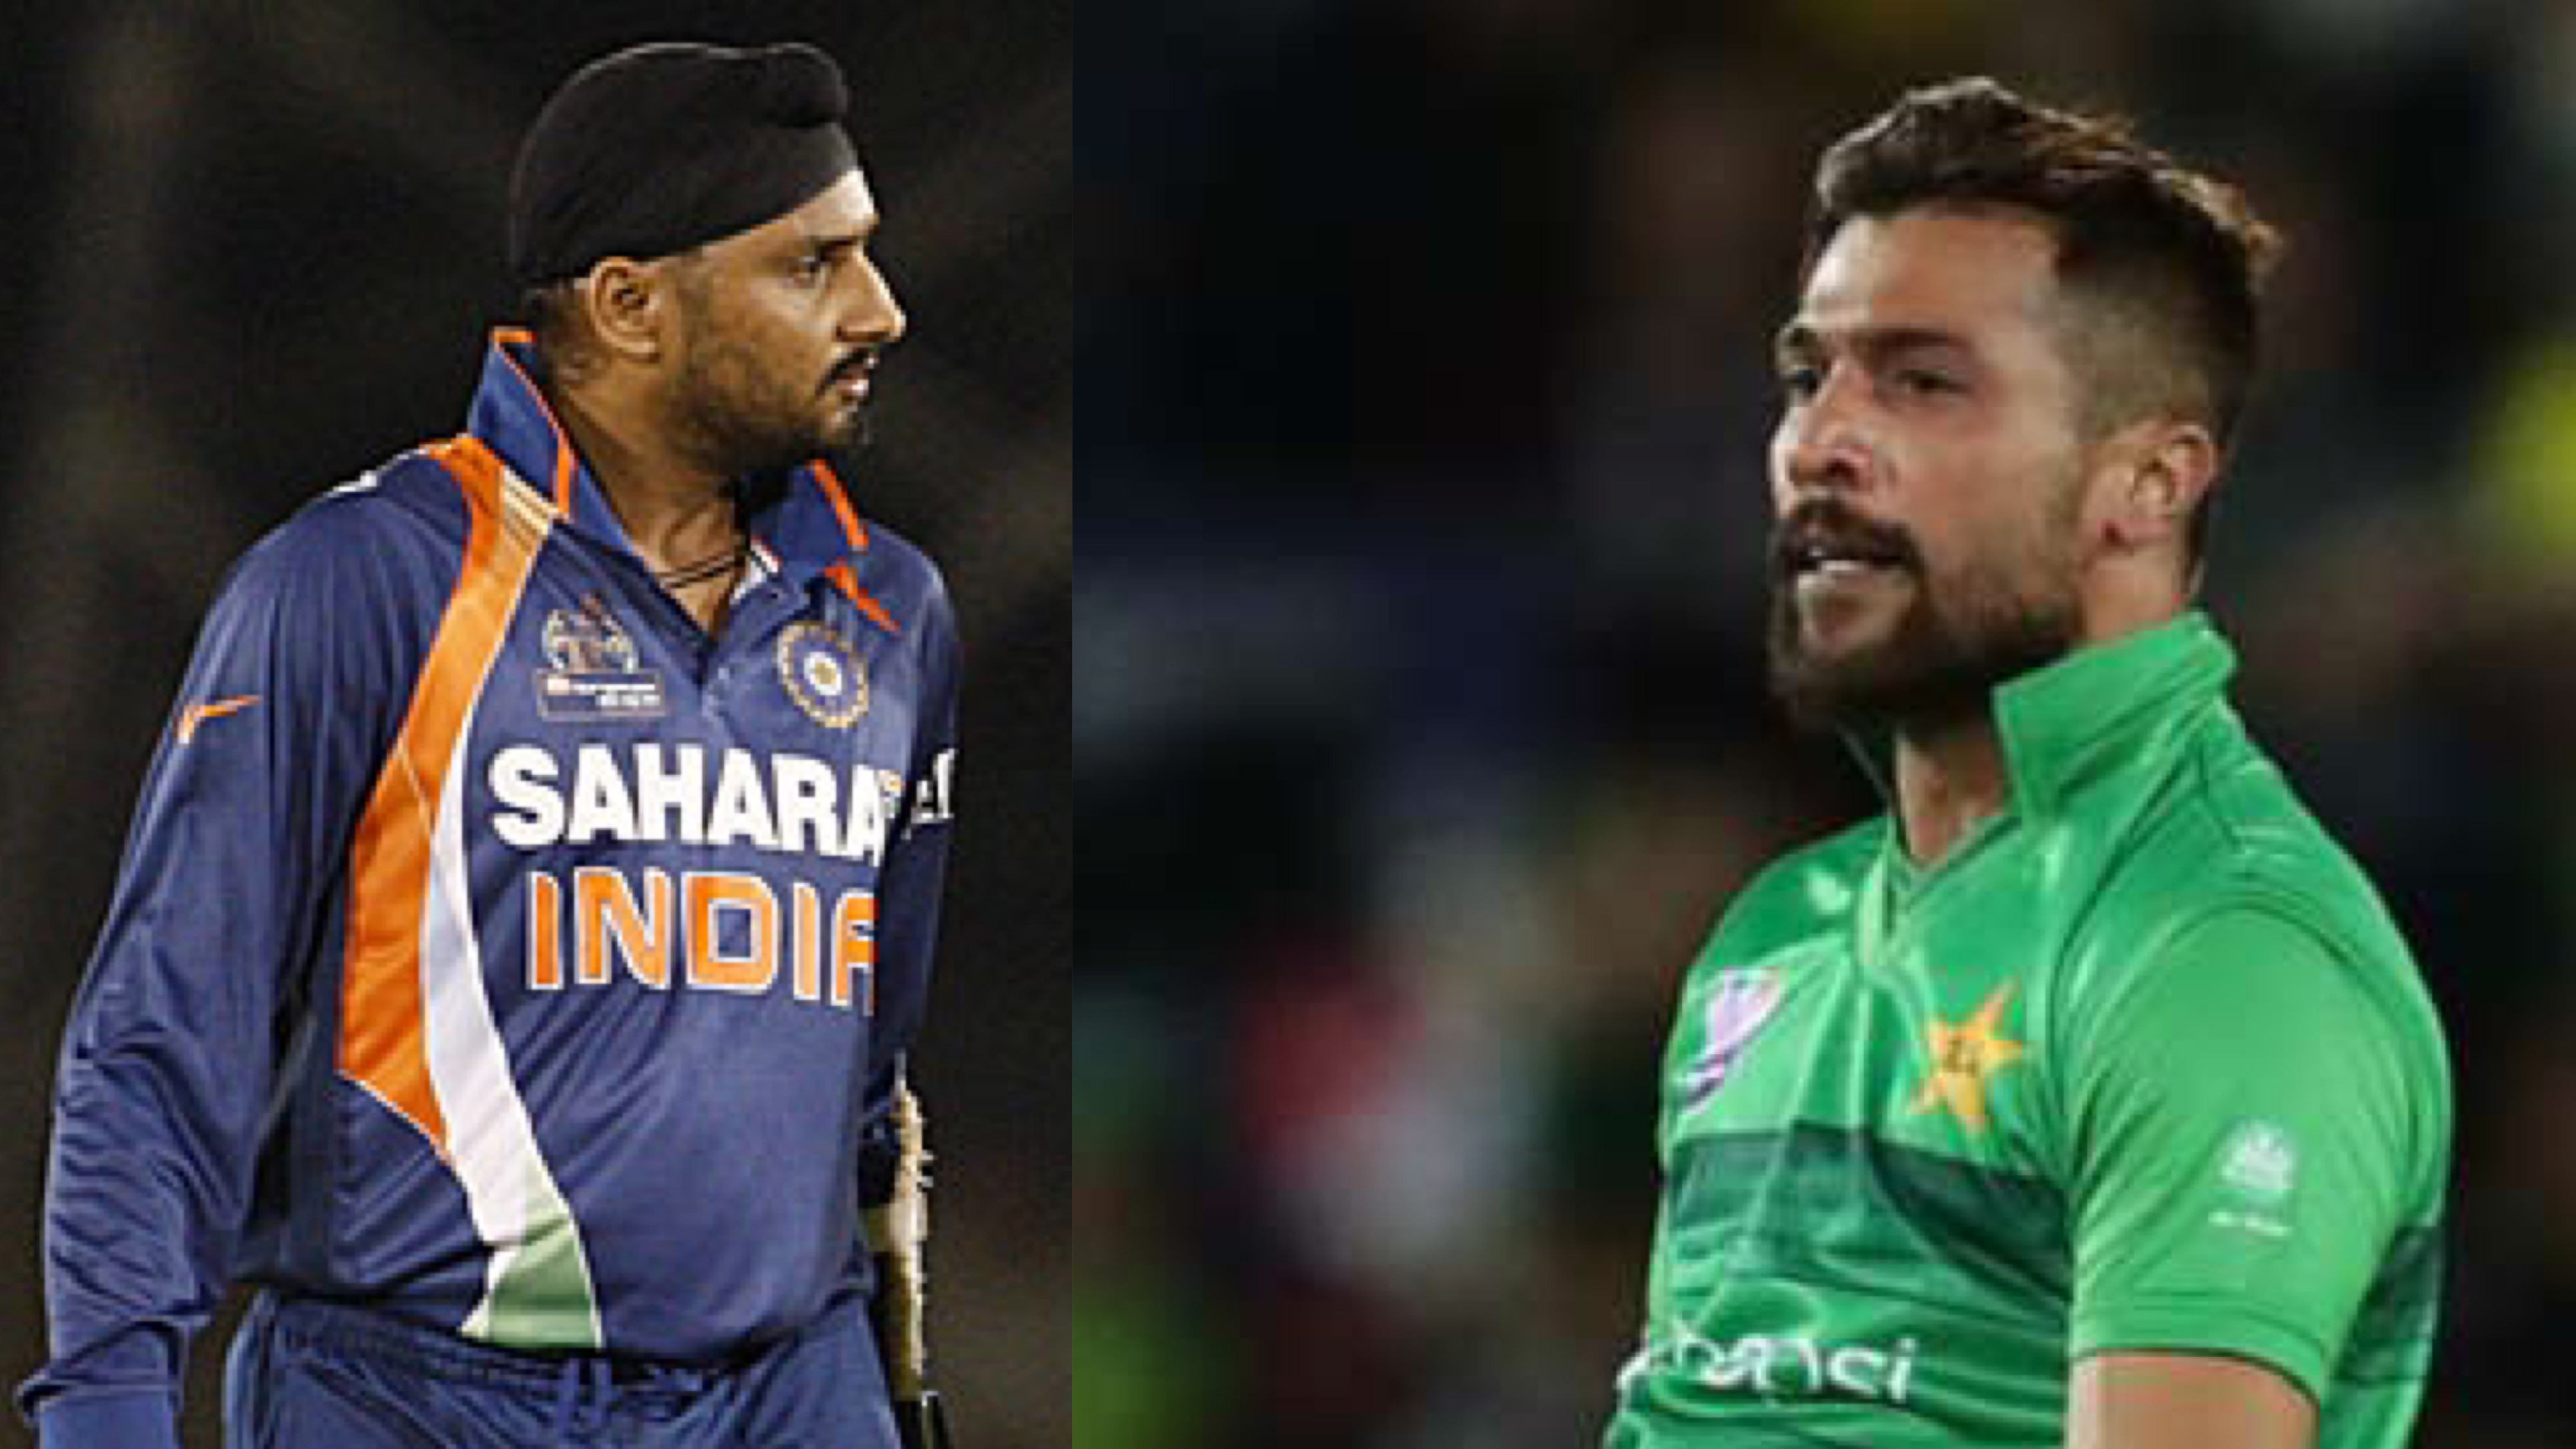 T20 World Cup 2021: Harbhajan Singh-Mohammad Amir's Twitter banter gets personal after taking ugly turn